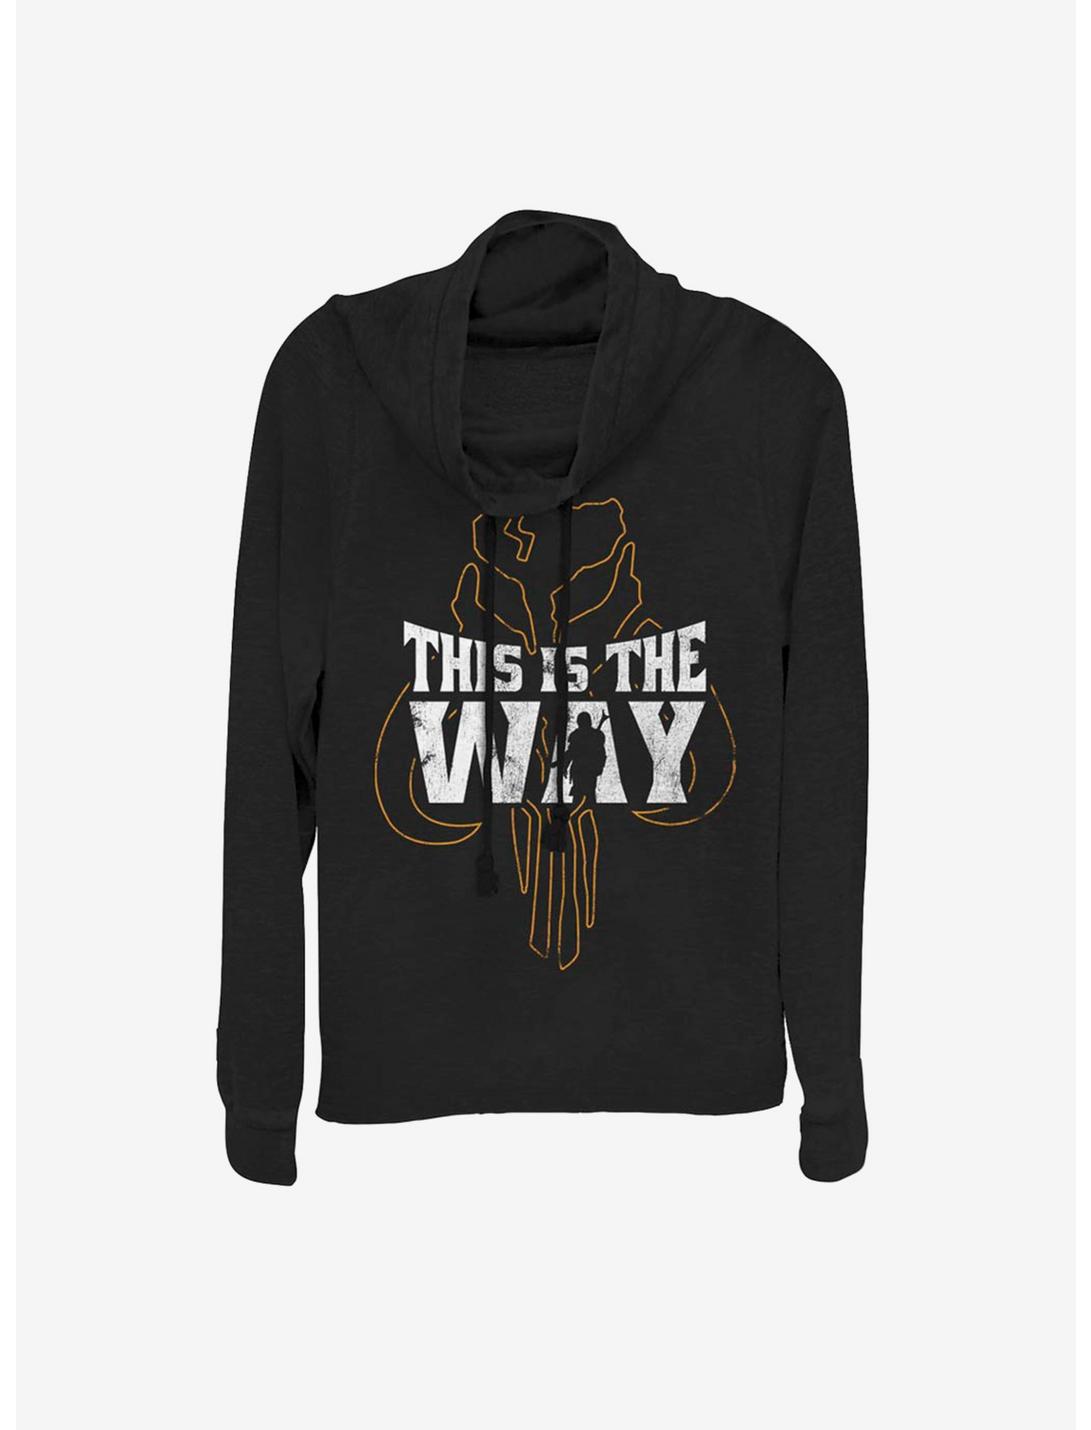 Star Wars The Mandalorian This Is The Way Silhouette Cowlneck Long-Sleeve Womens Top, BLACK, hi-res